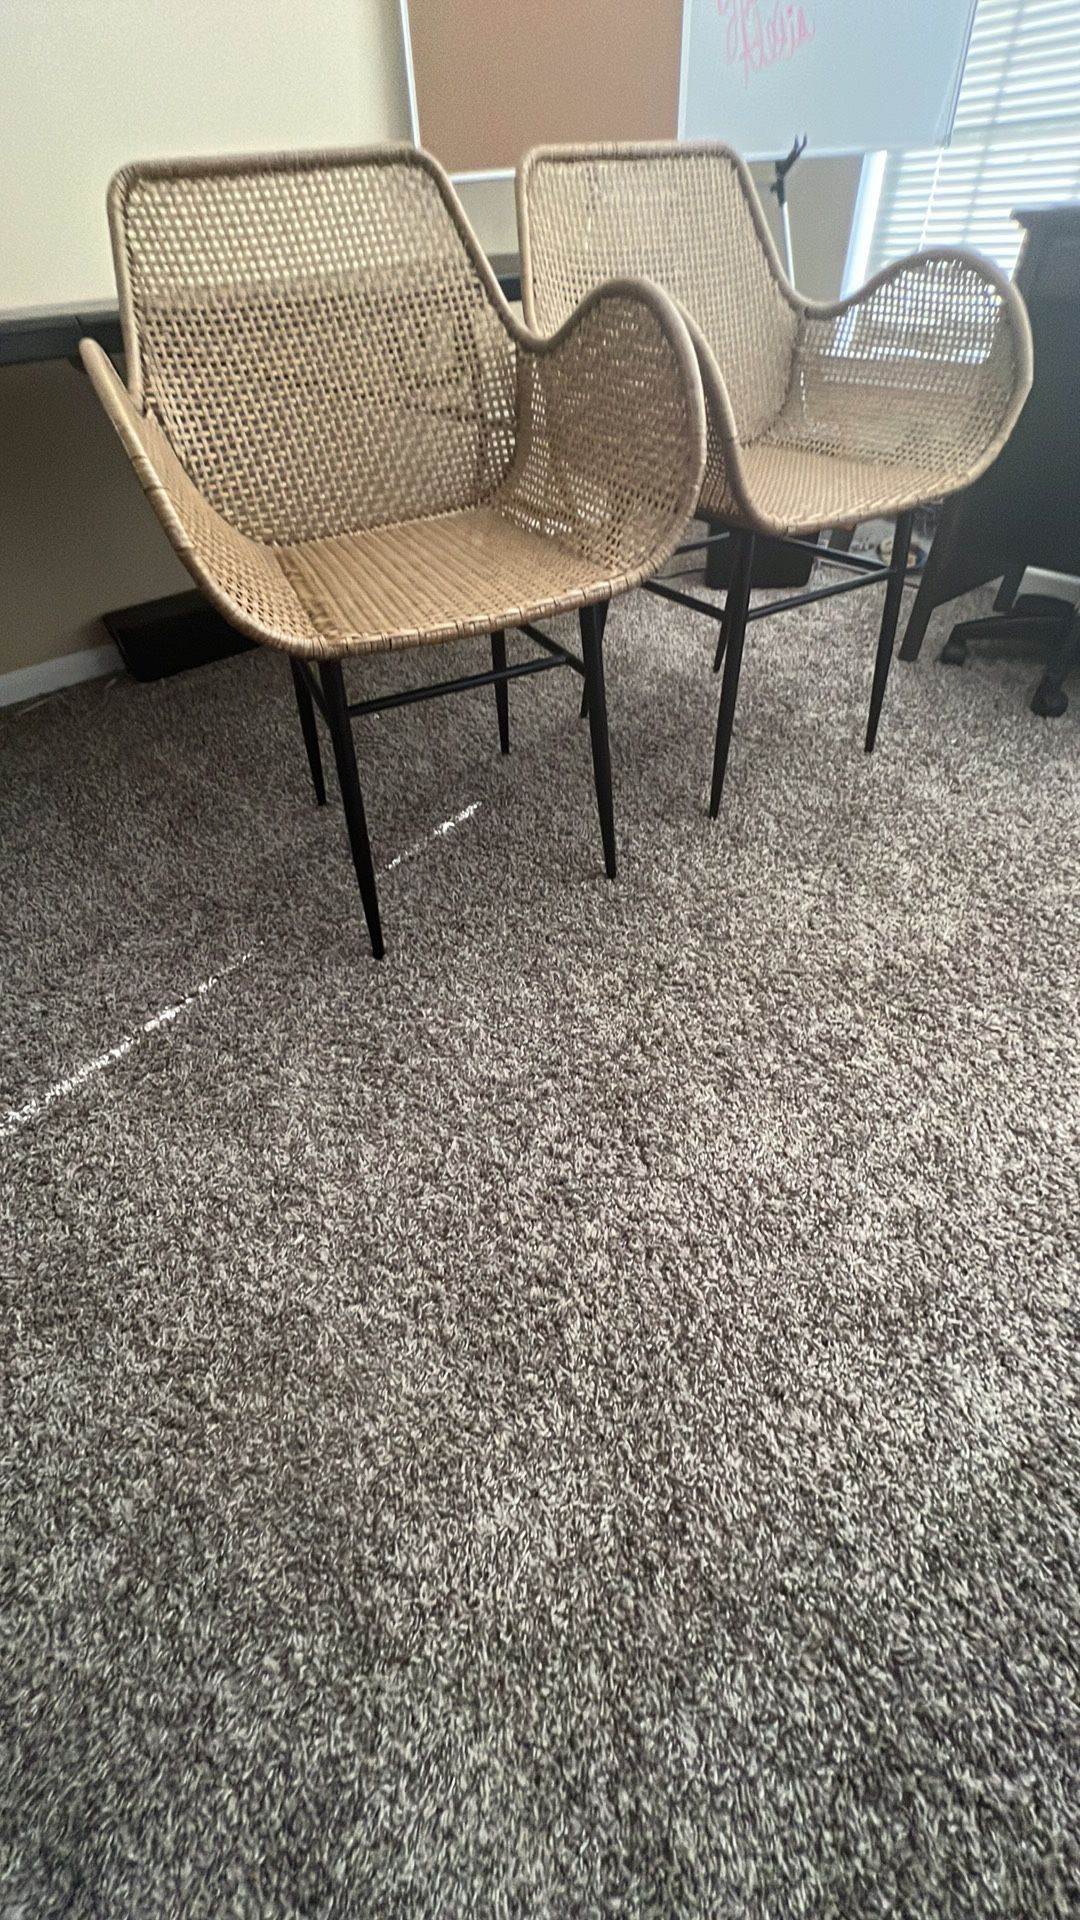 Set Of Patio Chairs 